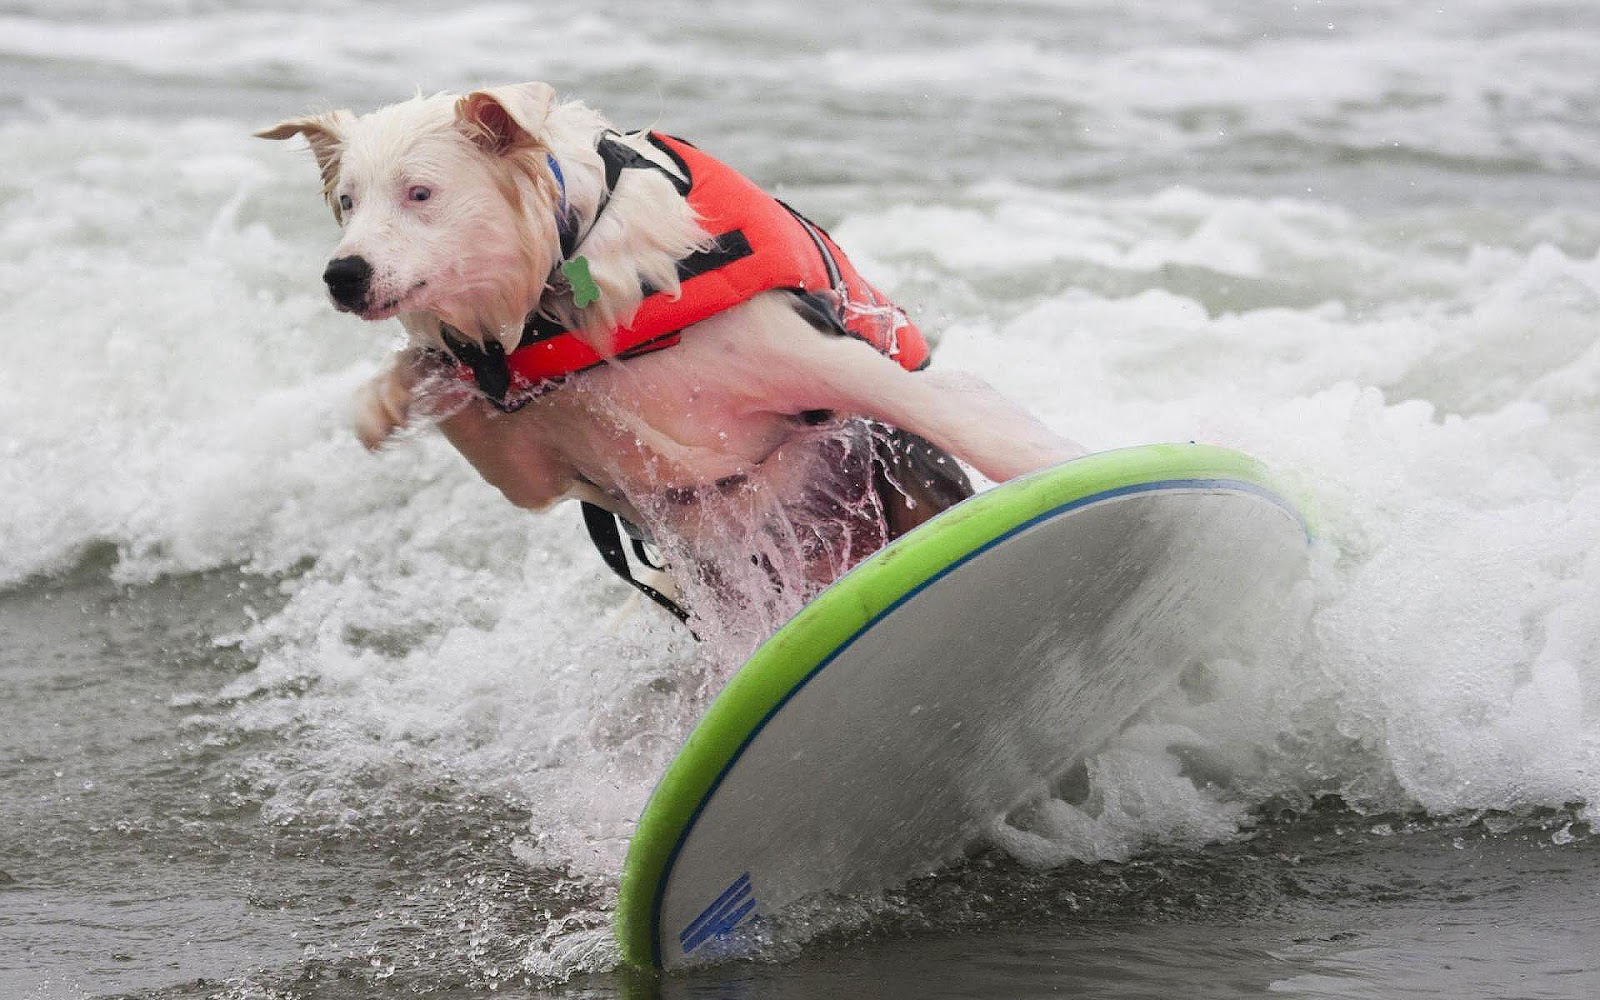 HD Dog Wallpaper With A On Surfboard Dogs Background Animal Jpg